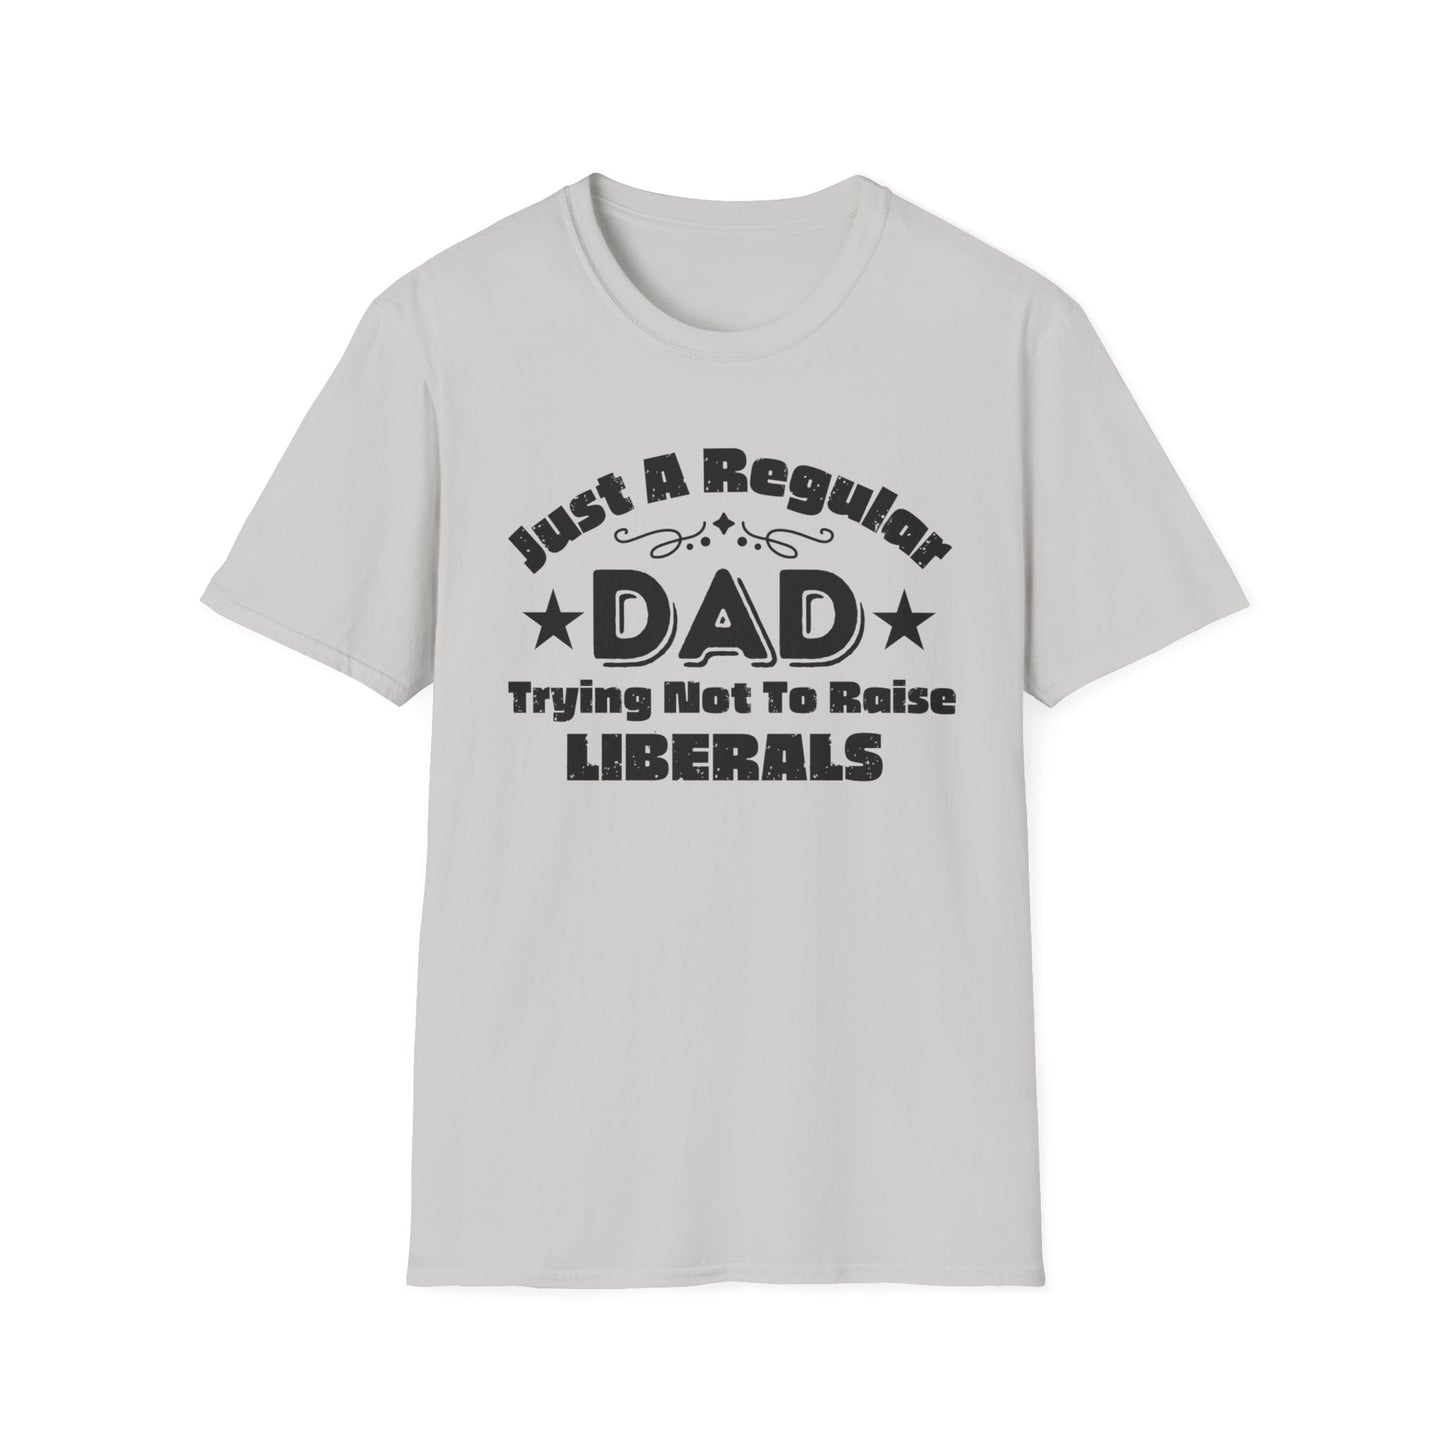 Just a regular dad trying not to raise liberals - Unisex Softstyle T-Shirt cc